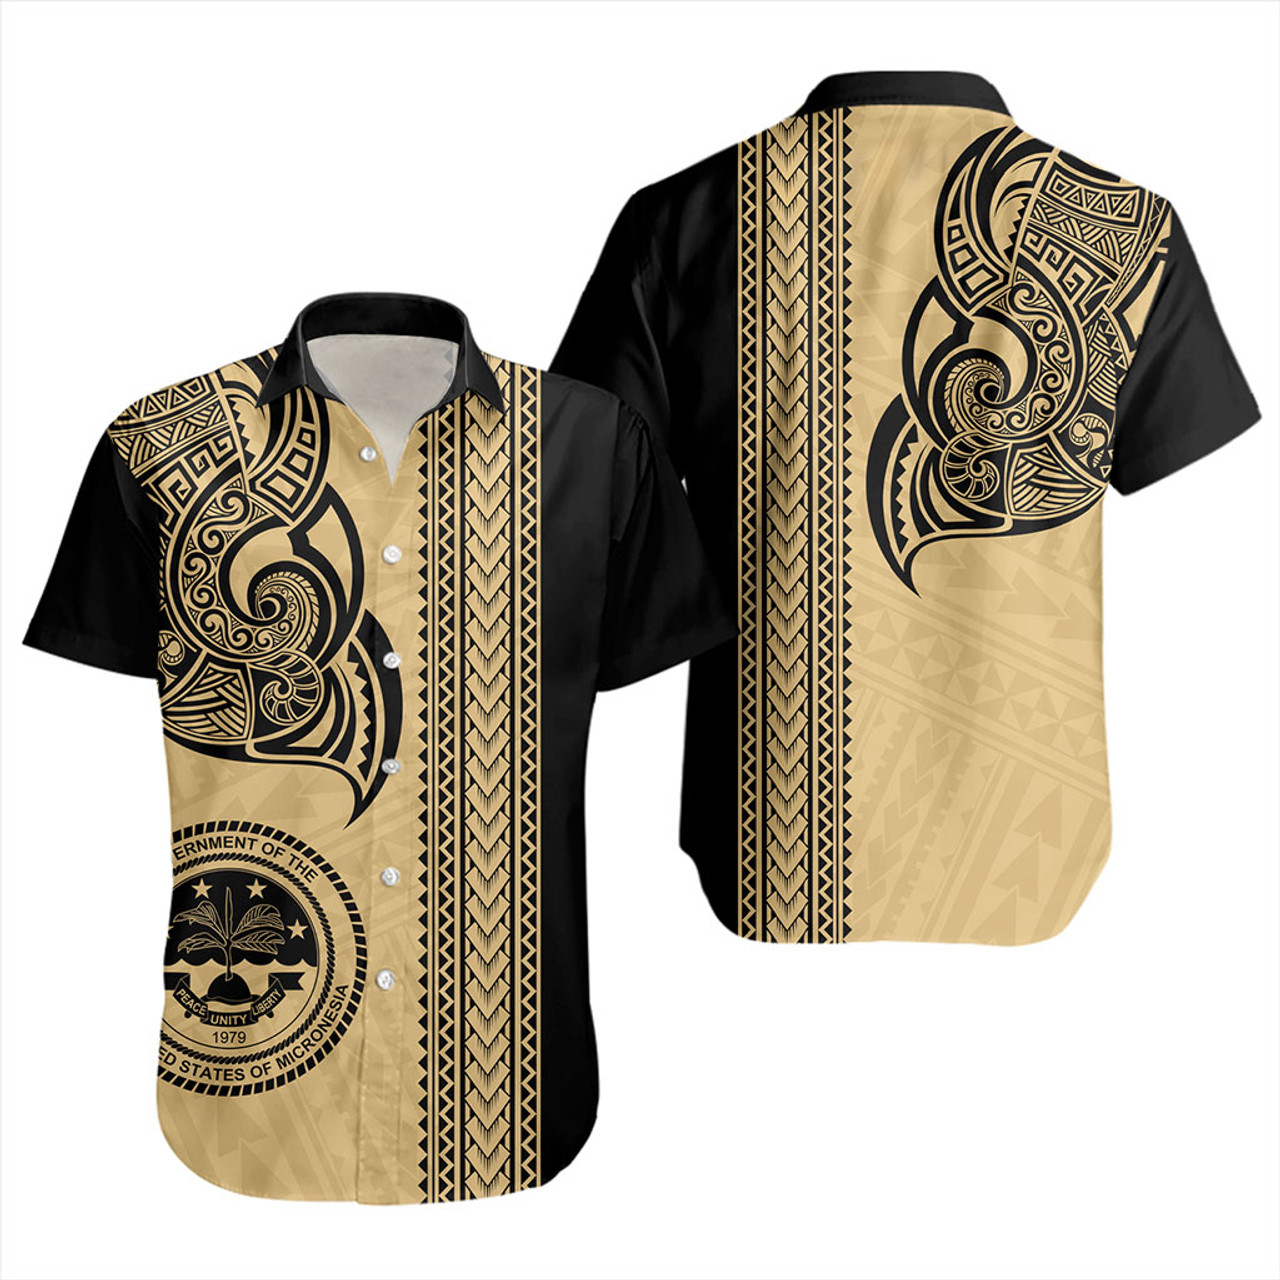 Federated States Of Micronesia Short Sleeve Shirt Polynesia Coat Of Arms Tribal Tattoo